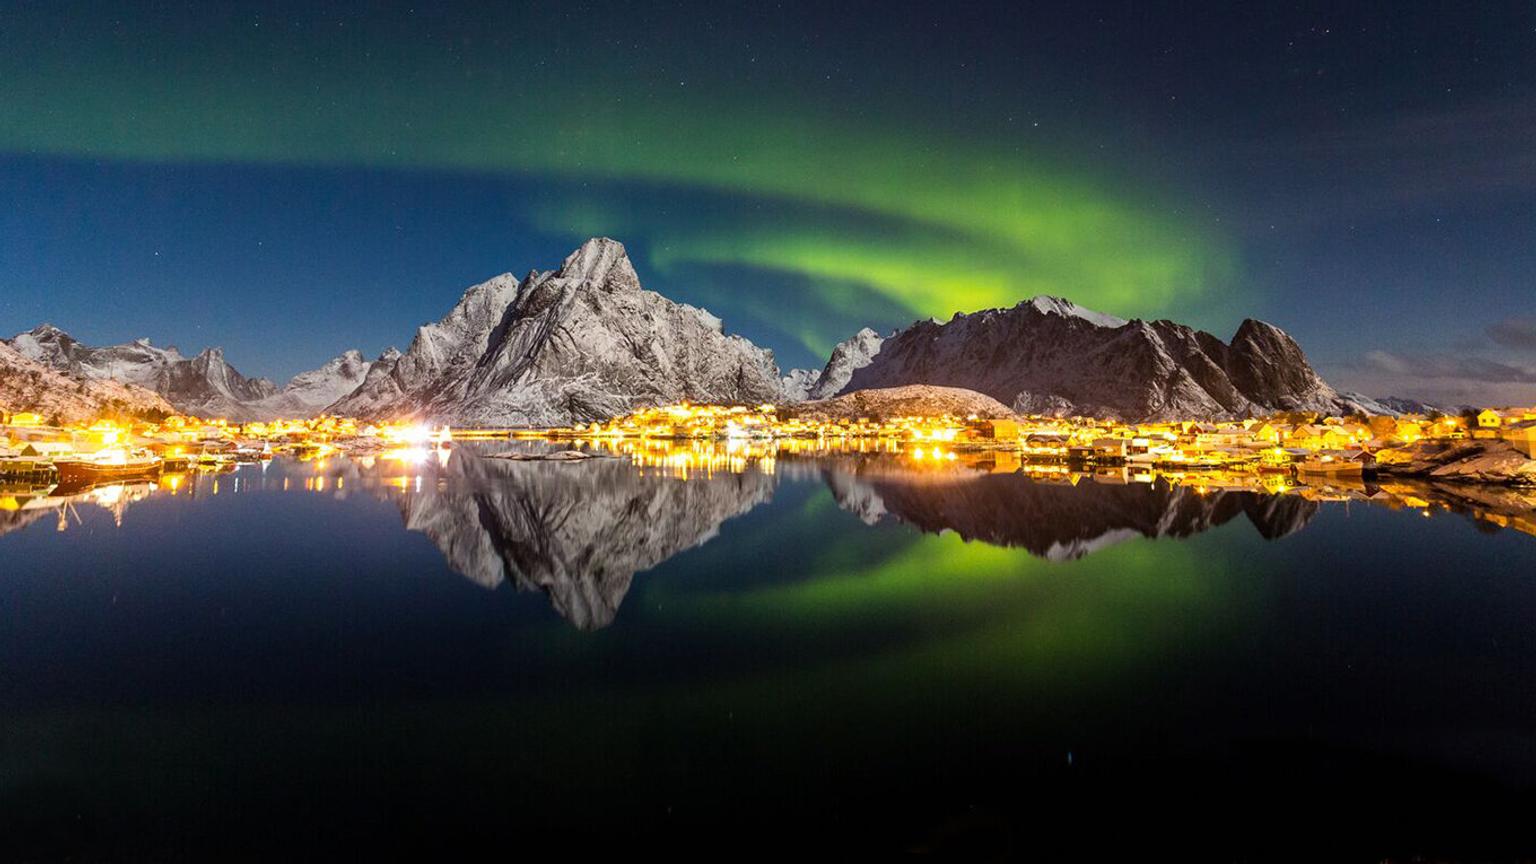 Northern lights over mountains